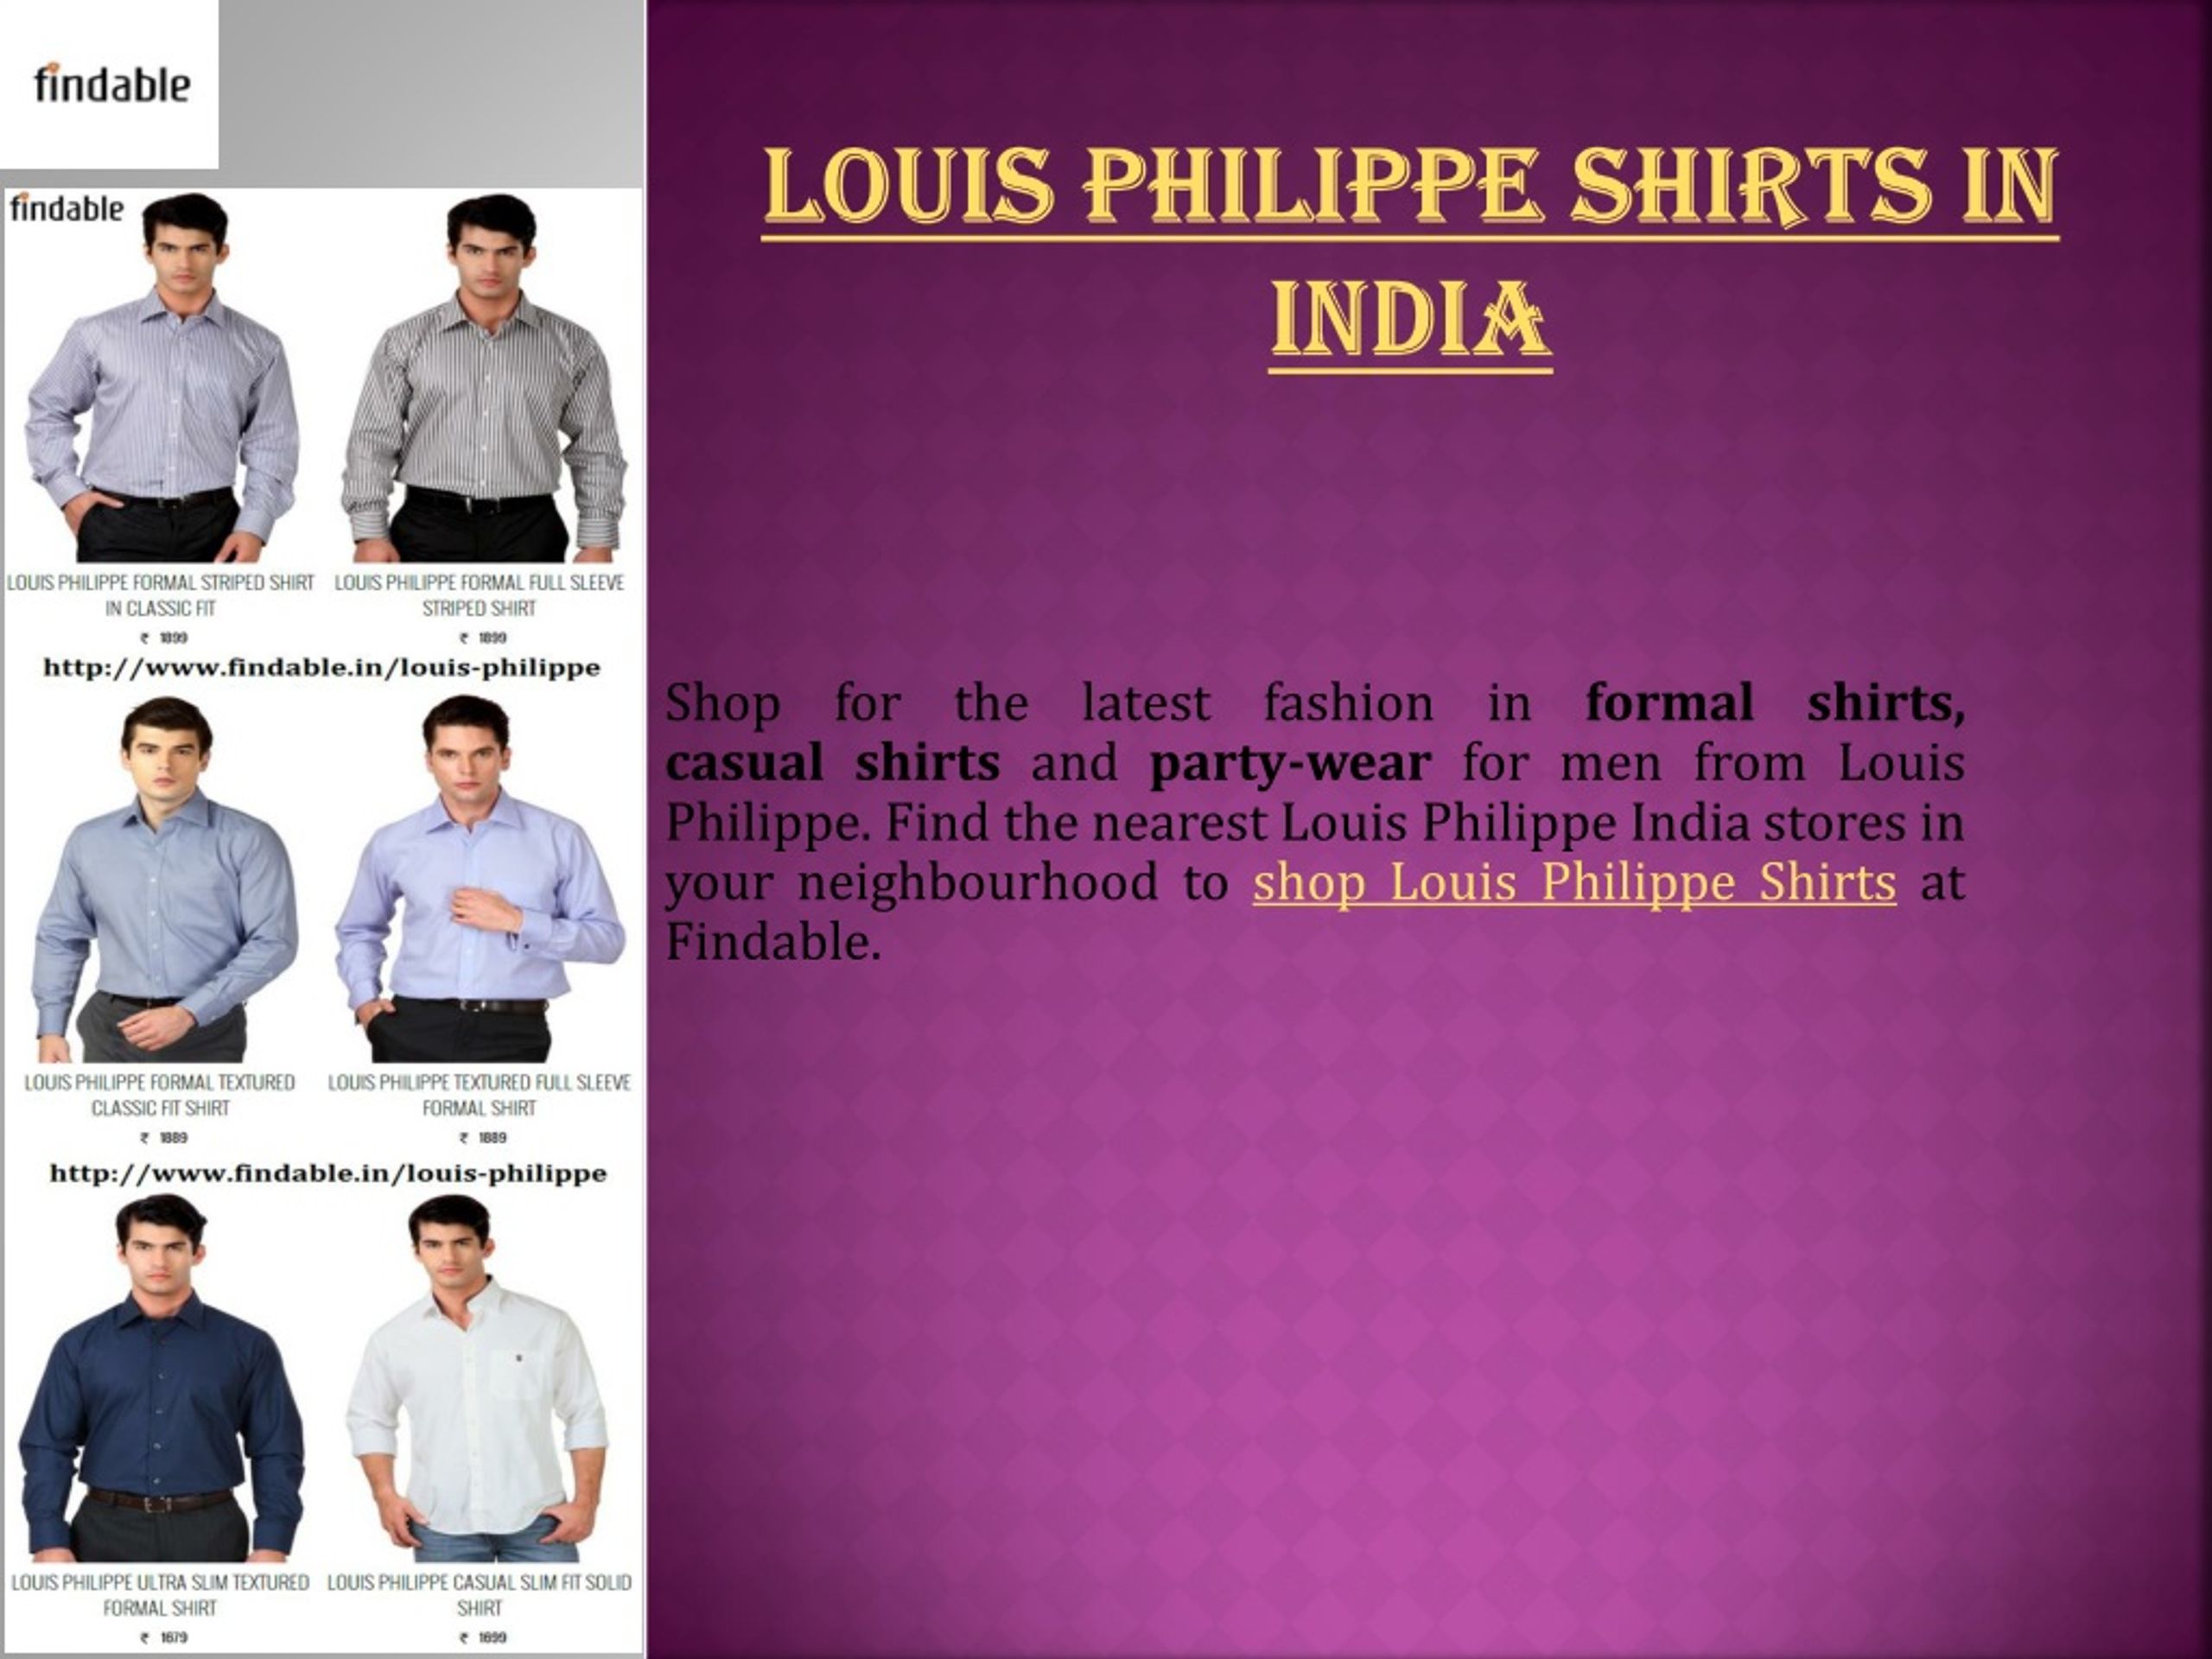 LP-logo T-Shirts | Buy LP-logo T-shirts online for Men and Women in India